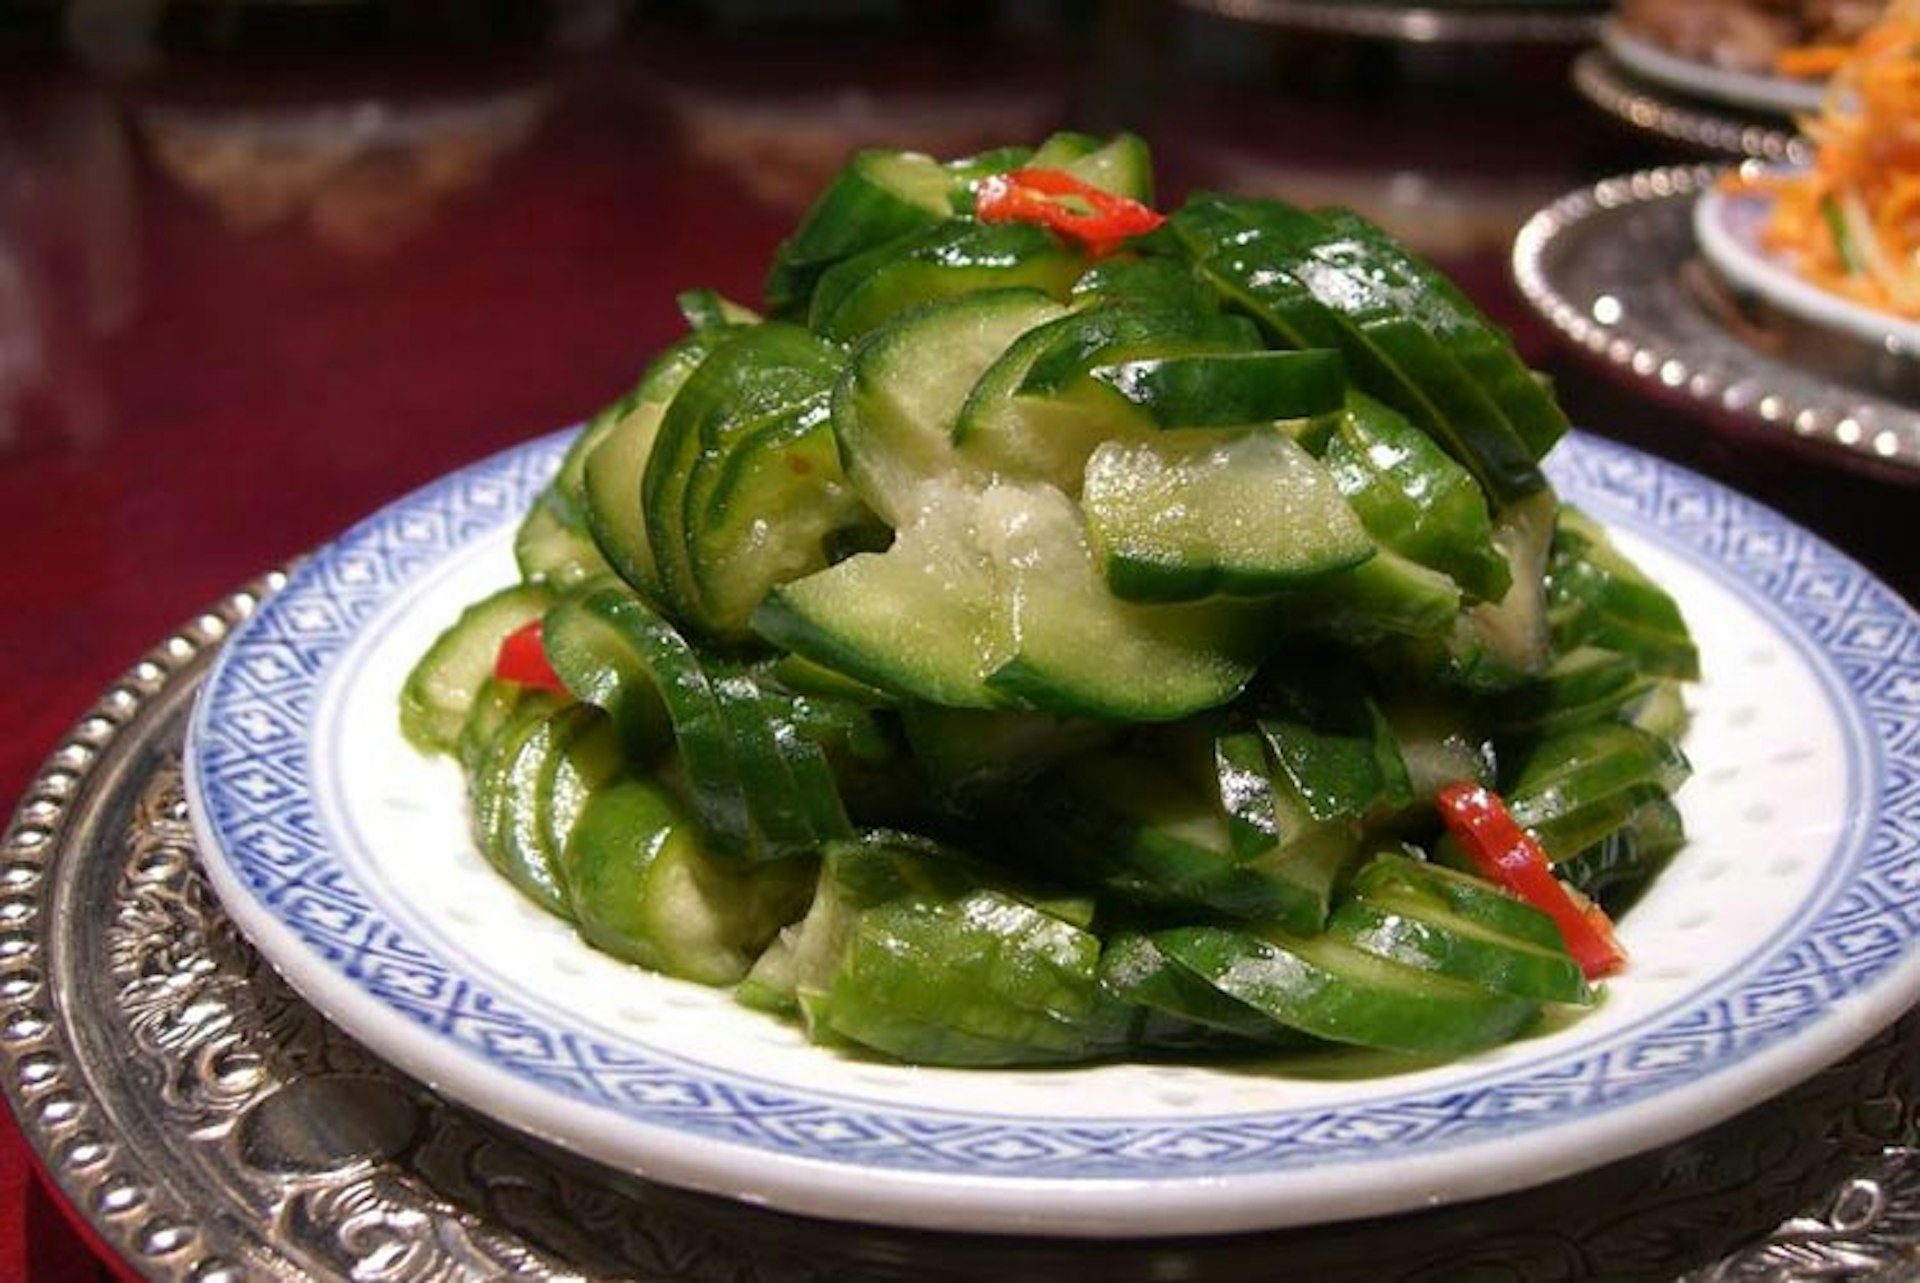 Pickled cucumbers: a classic imperial dish. Image by Alpha / CC BY-SA 2.0